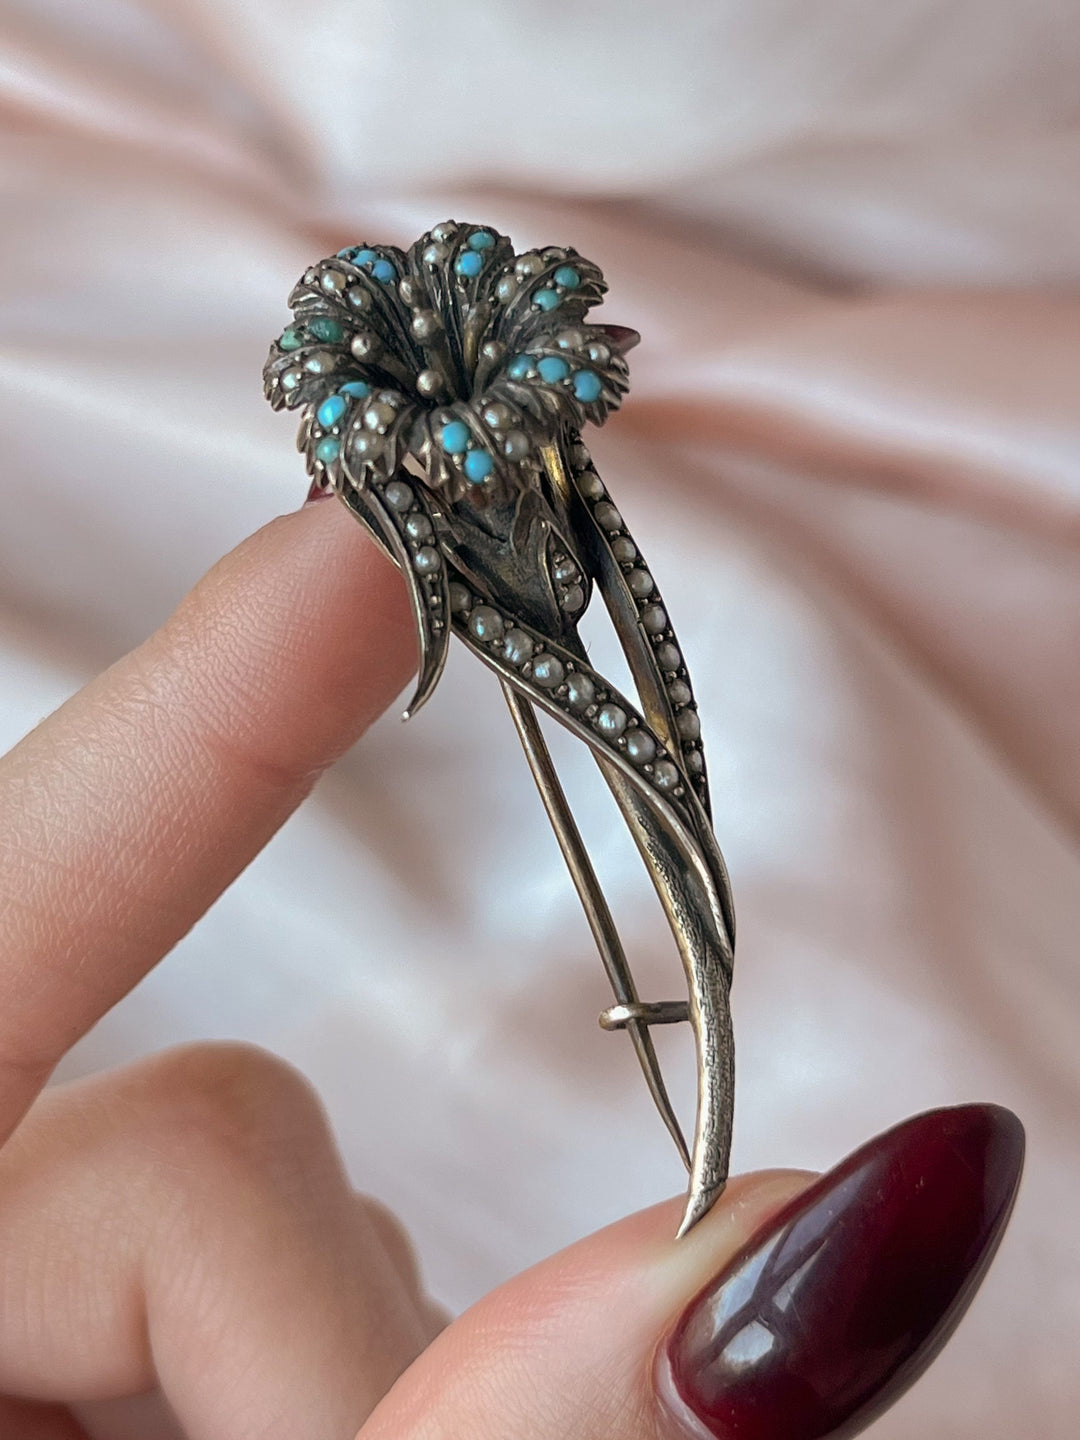 Superb Sterling and Turquoise Buttoner Brooch C. 1870